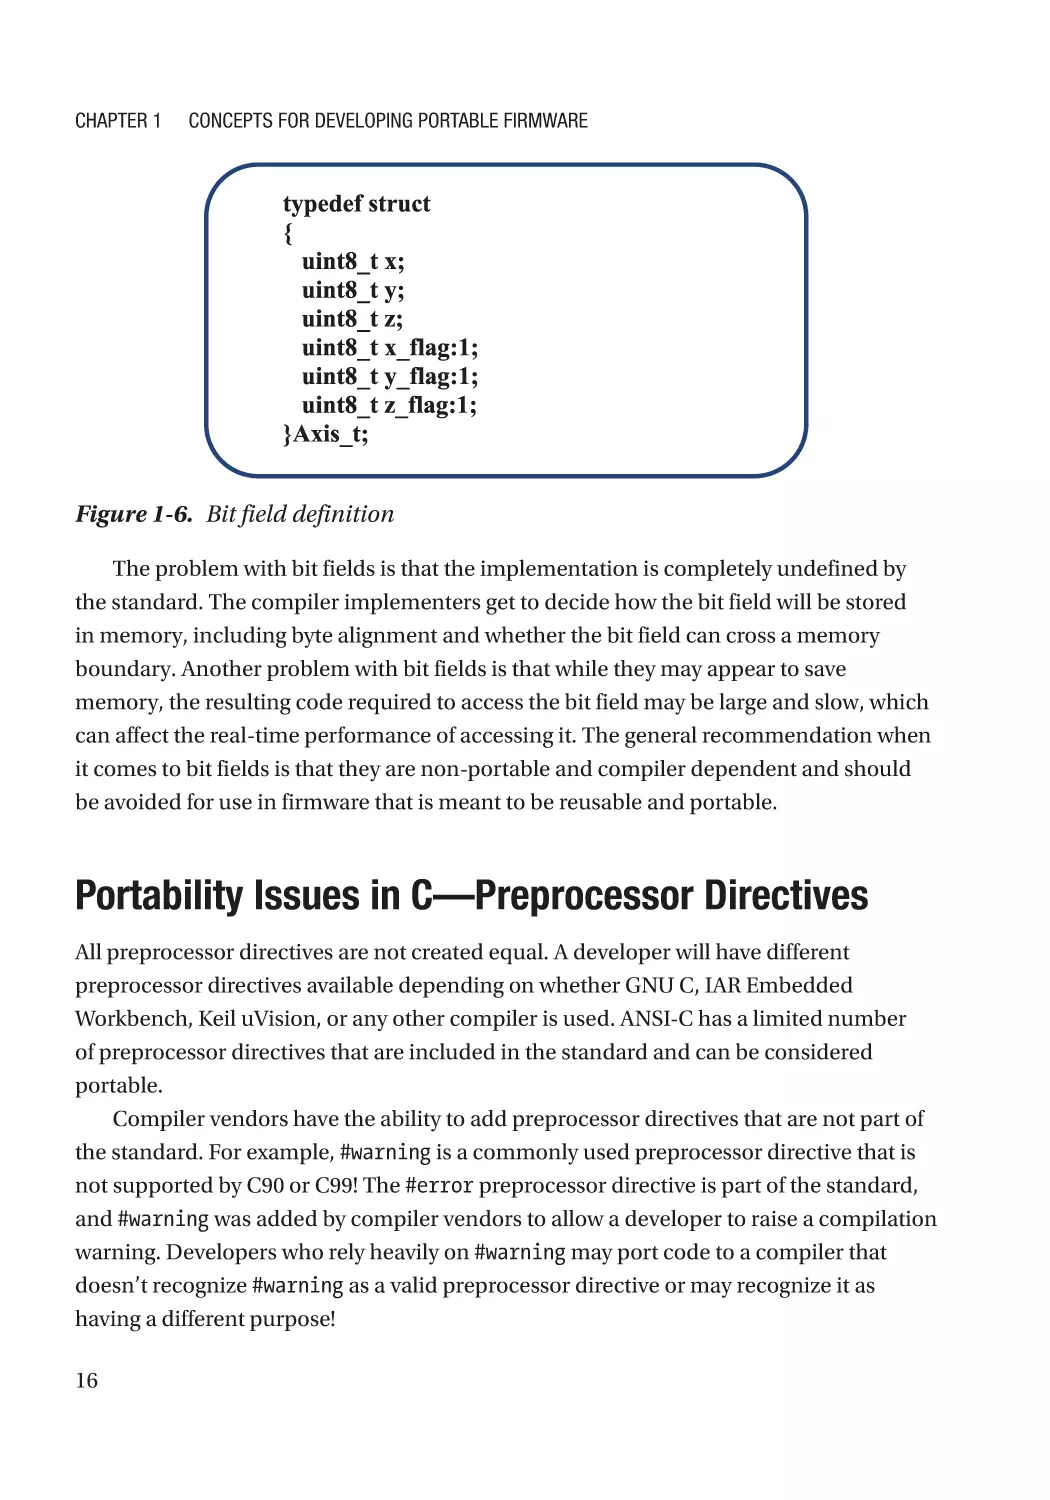 Portability Issues in C—Preprocessor Directives